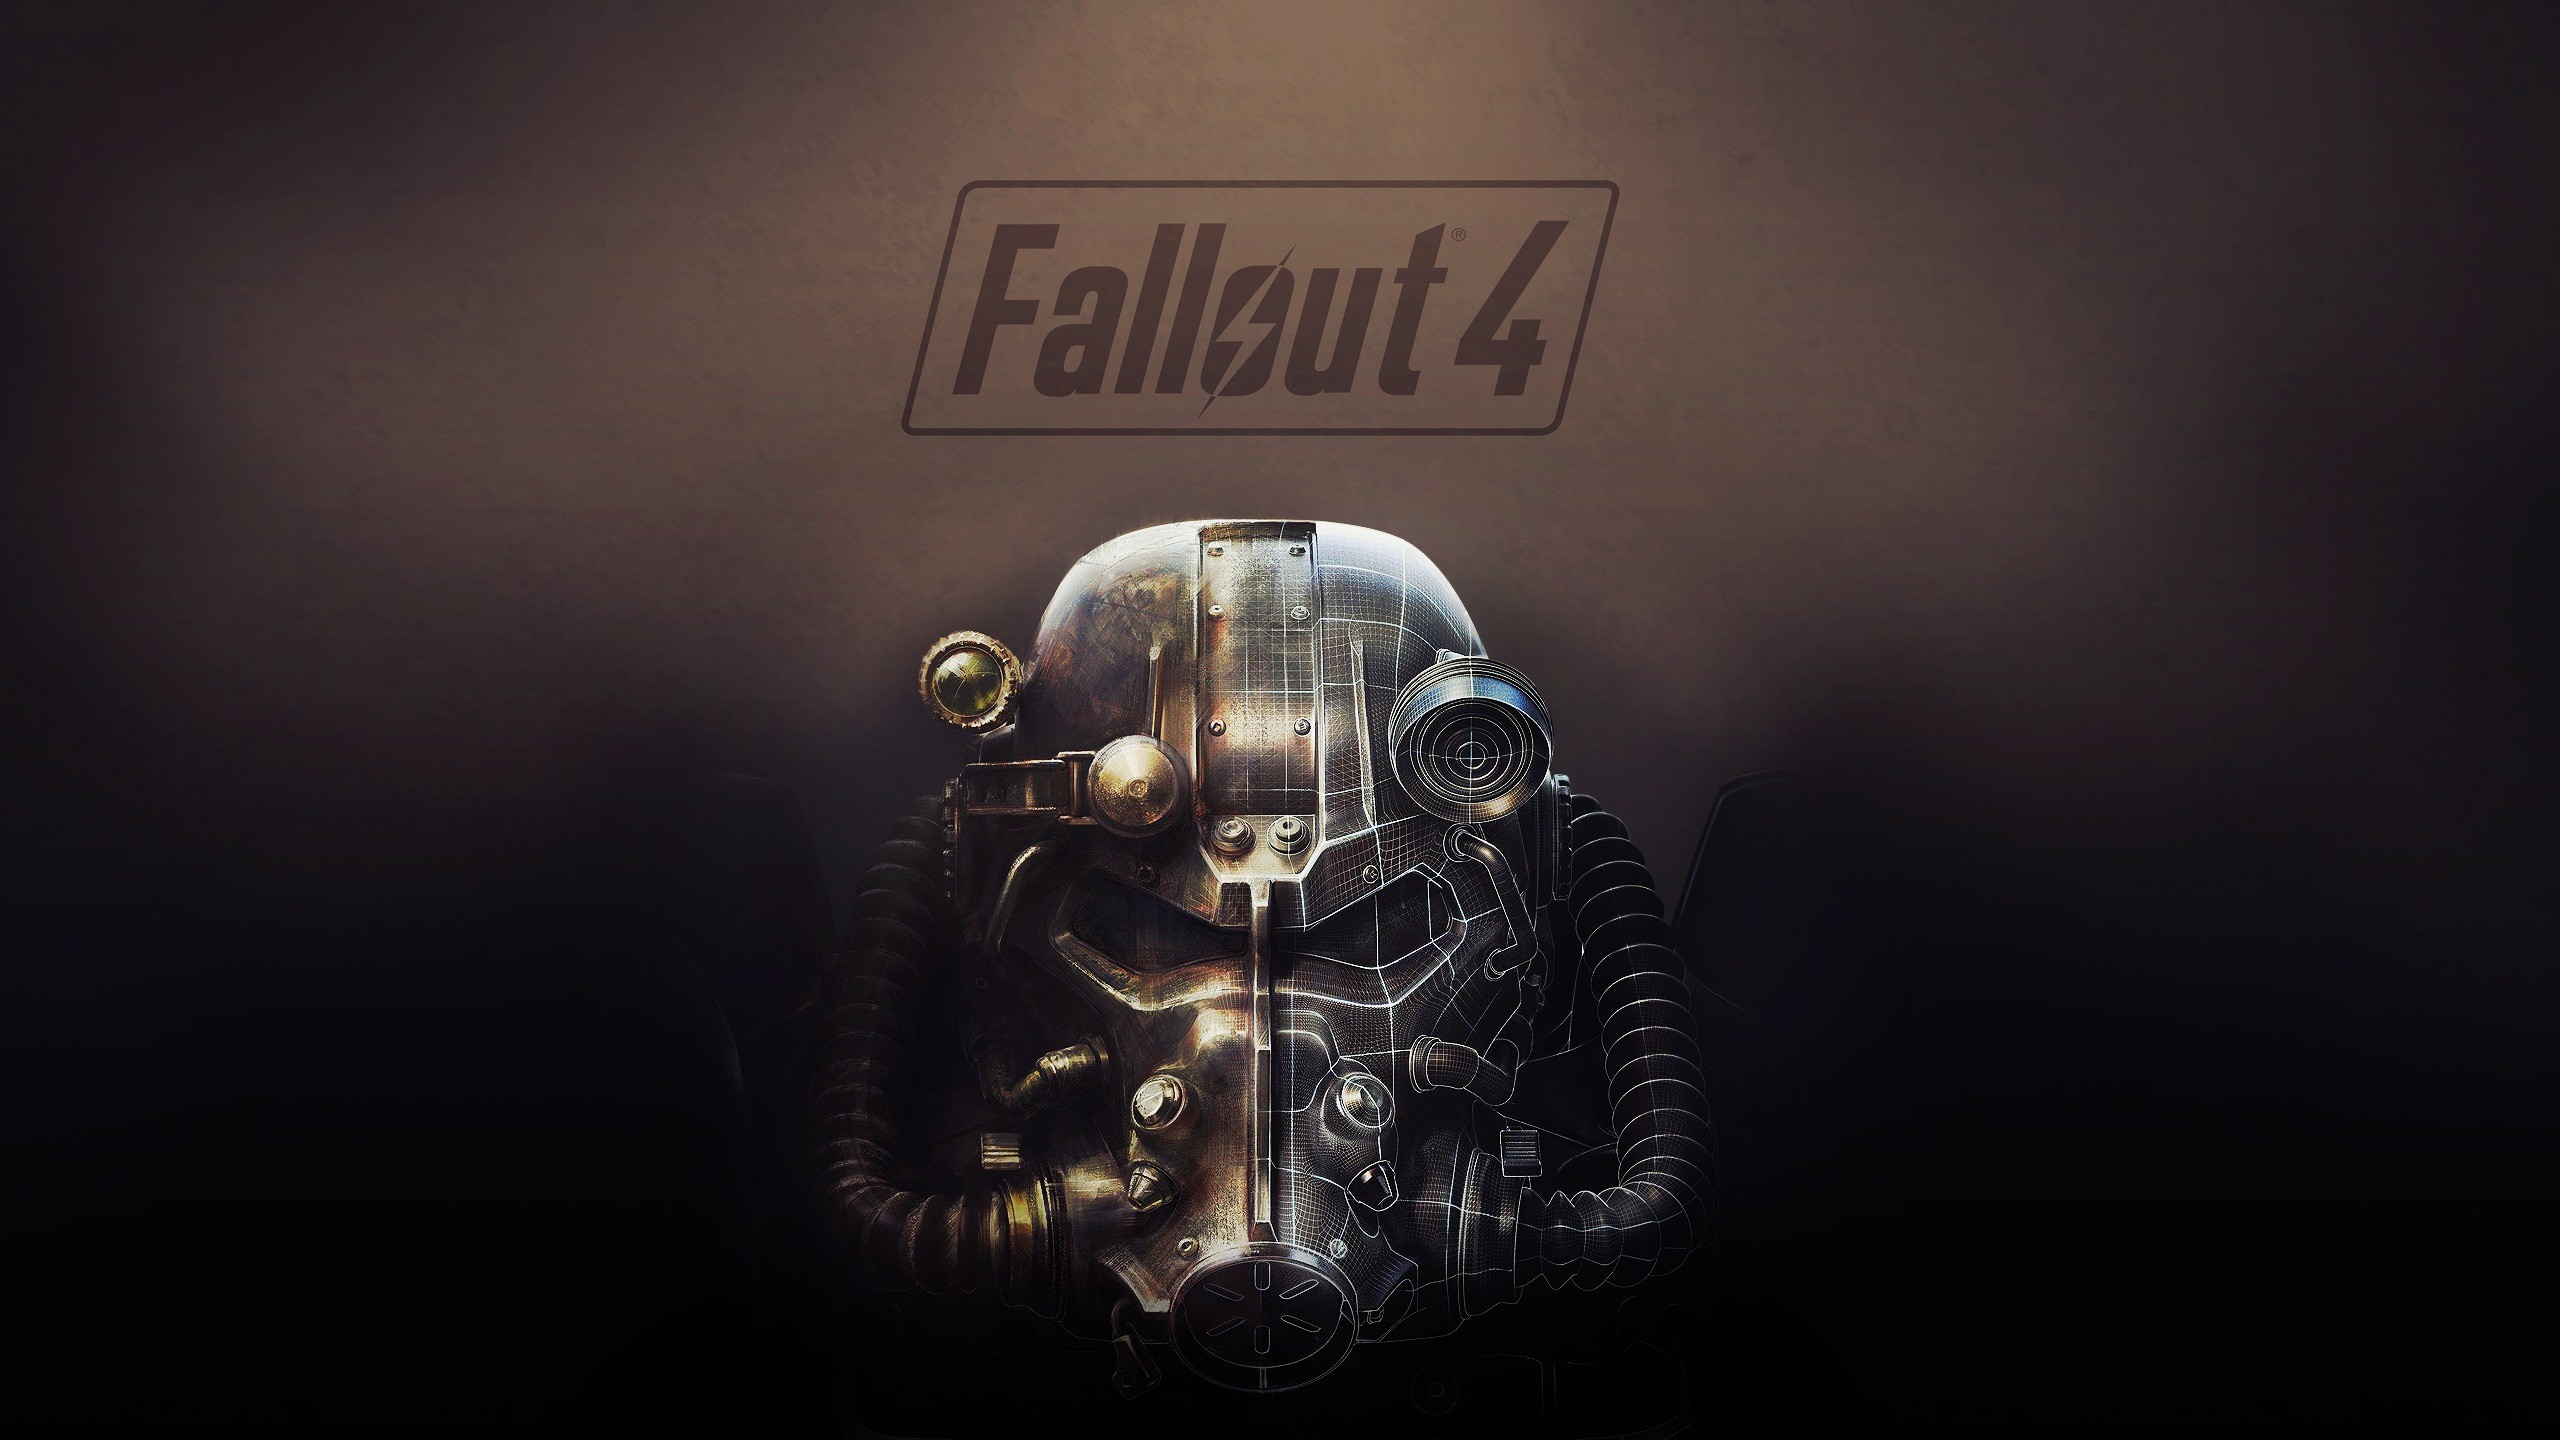 Fallout 4 v 1.10.163.0.1. [+ 7 DLC] | Game of the Year Edition